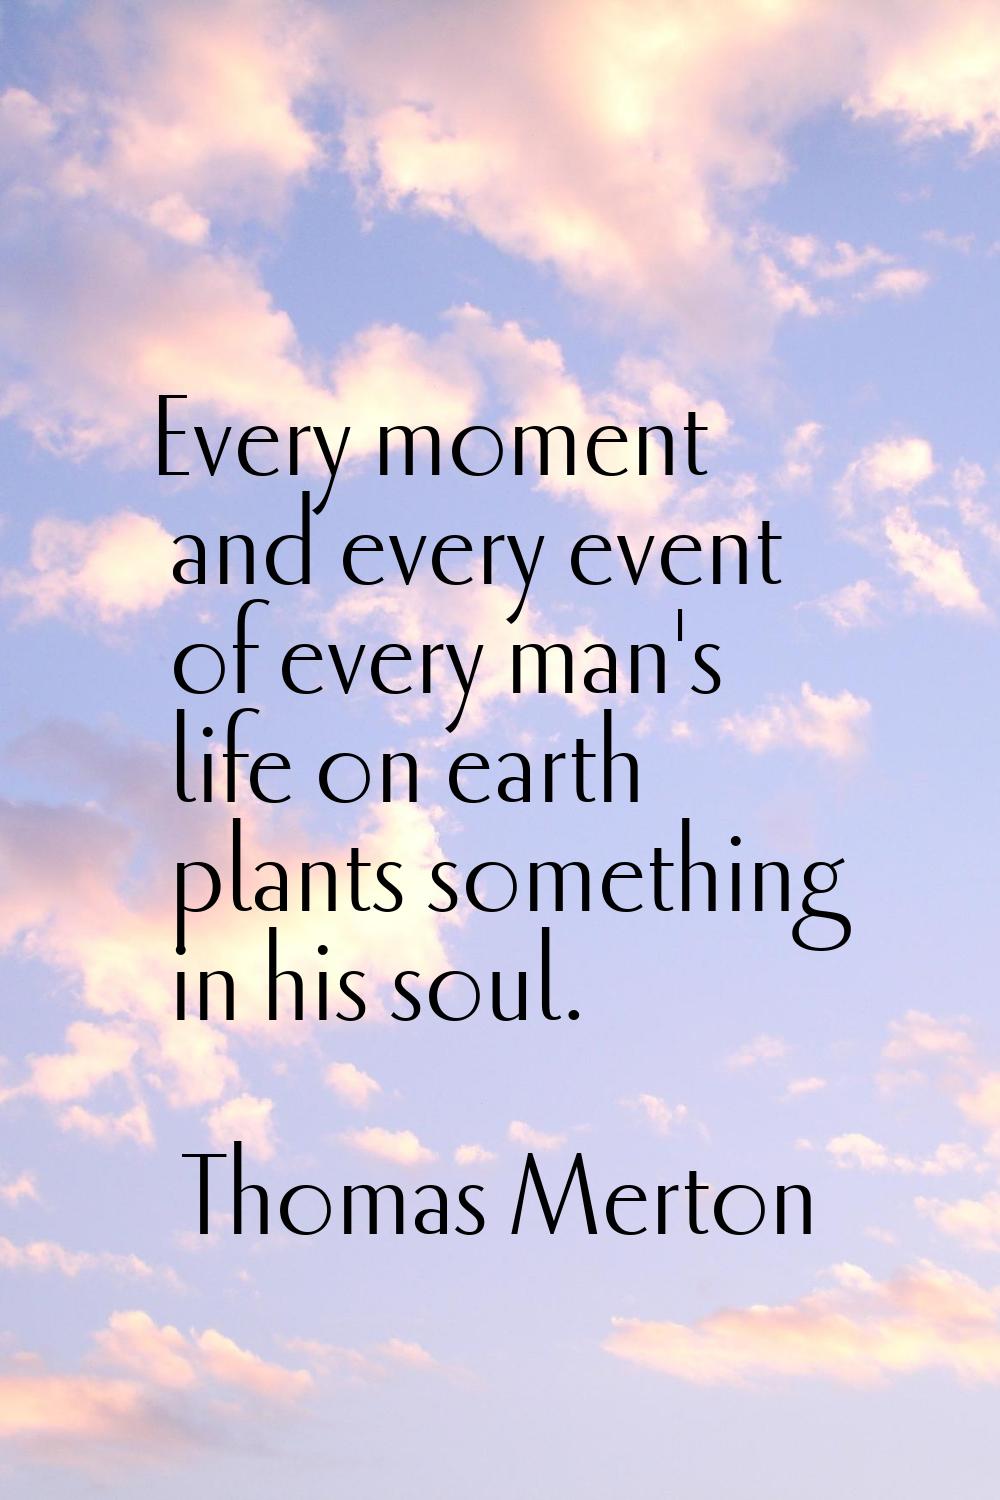 Every moment and every event of every man's life on earth plants something in his soul.